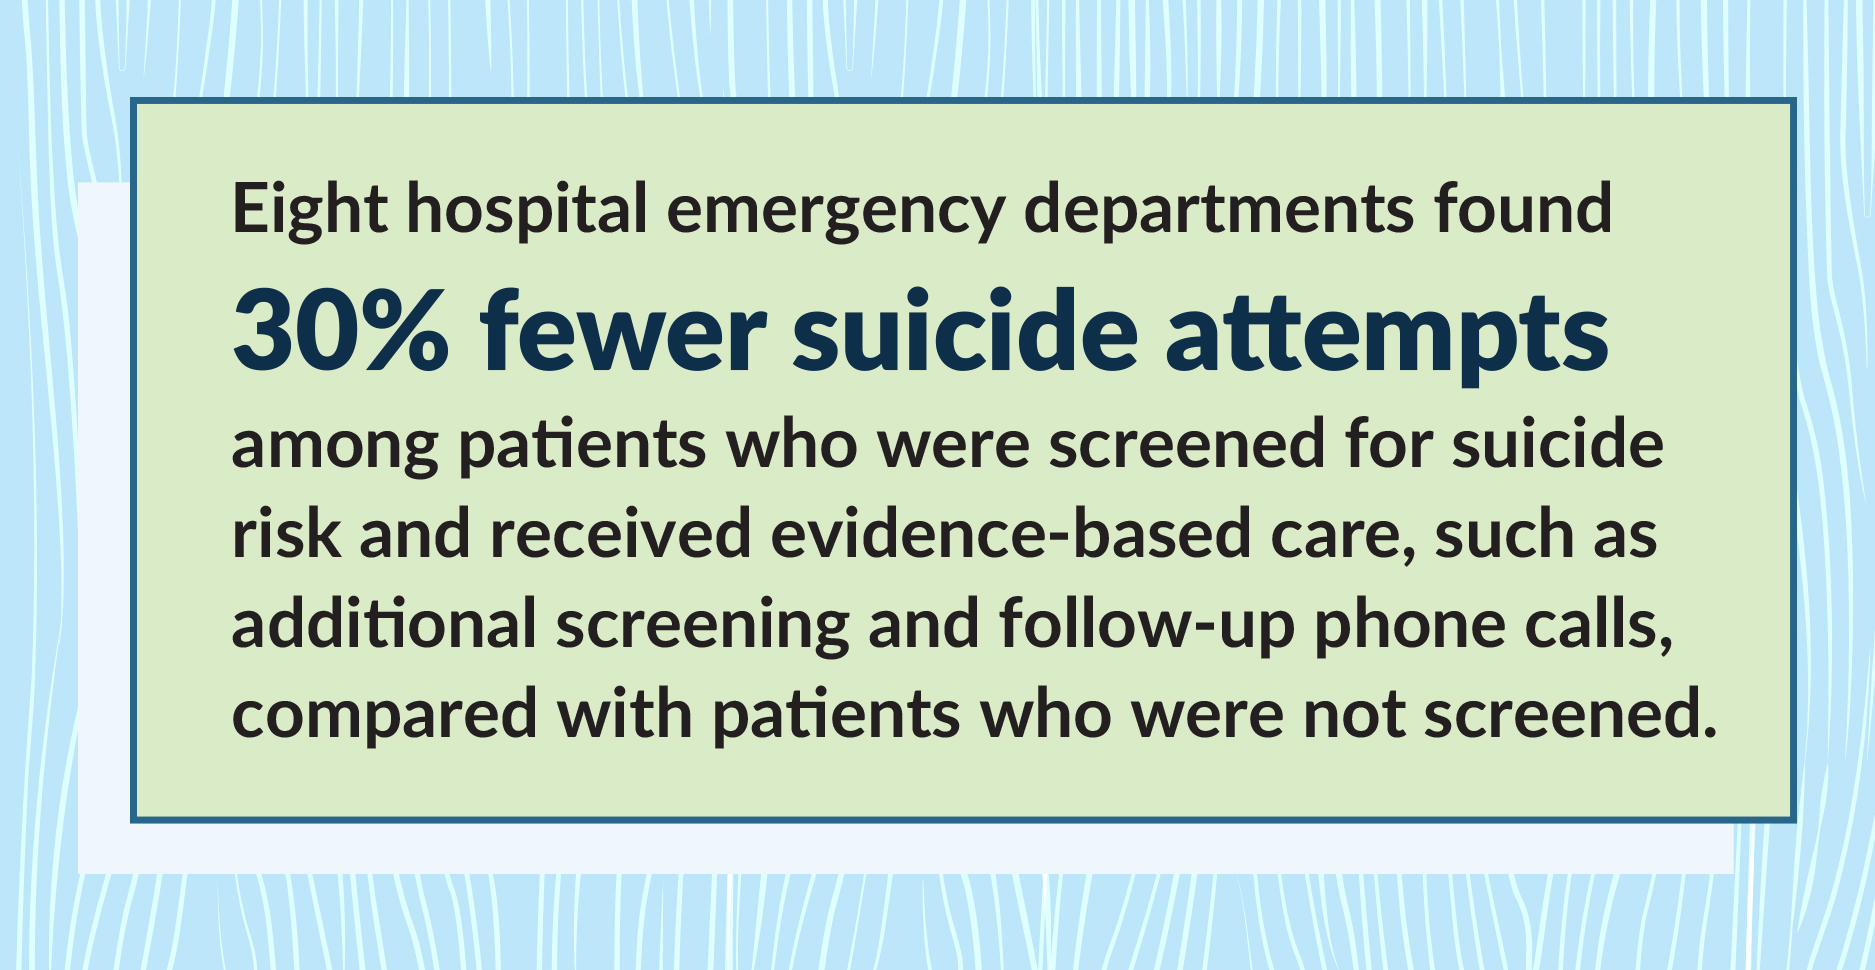 Eight hospital emergency departments found 30% fewer suicide attempts among patients who were screened for suicide risk and received evidence-based care, such as additional screening and follow-up phone calls, compared with patients who were not screened.